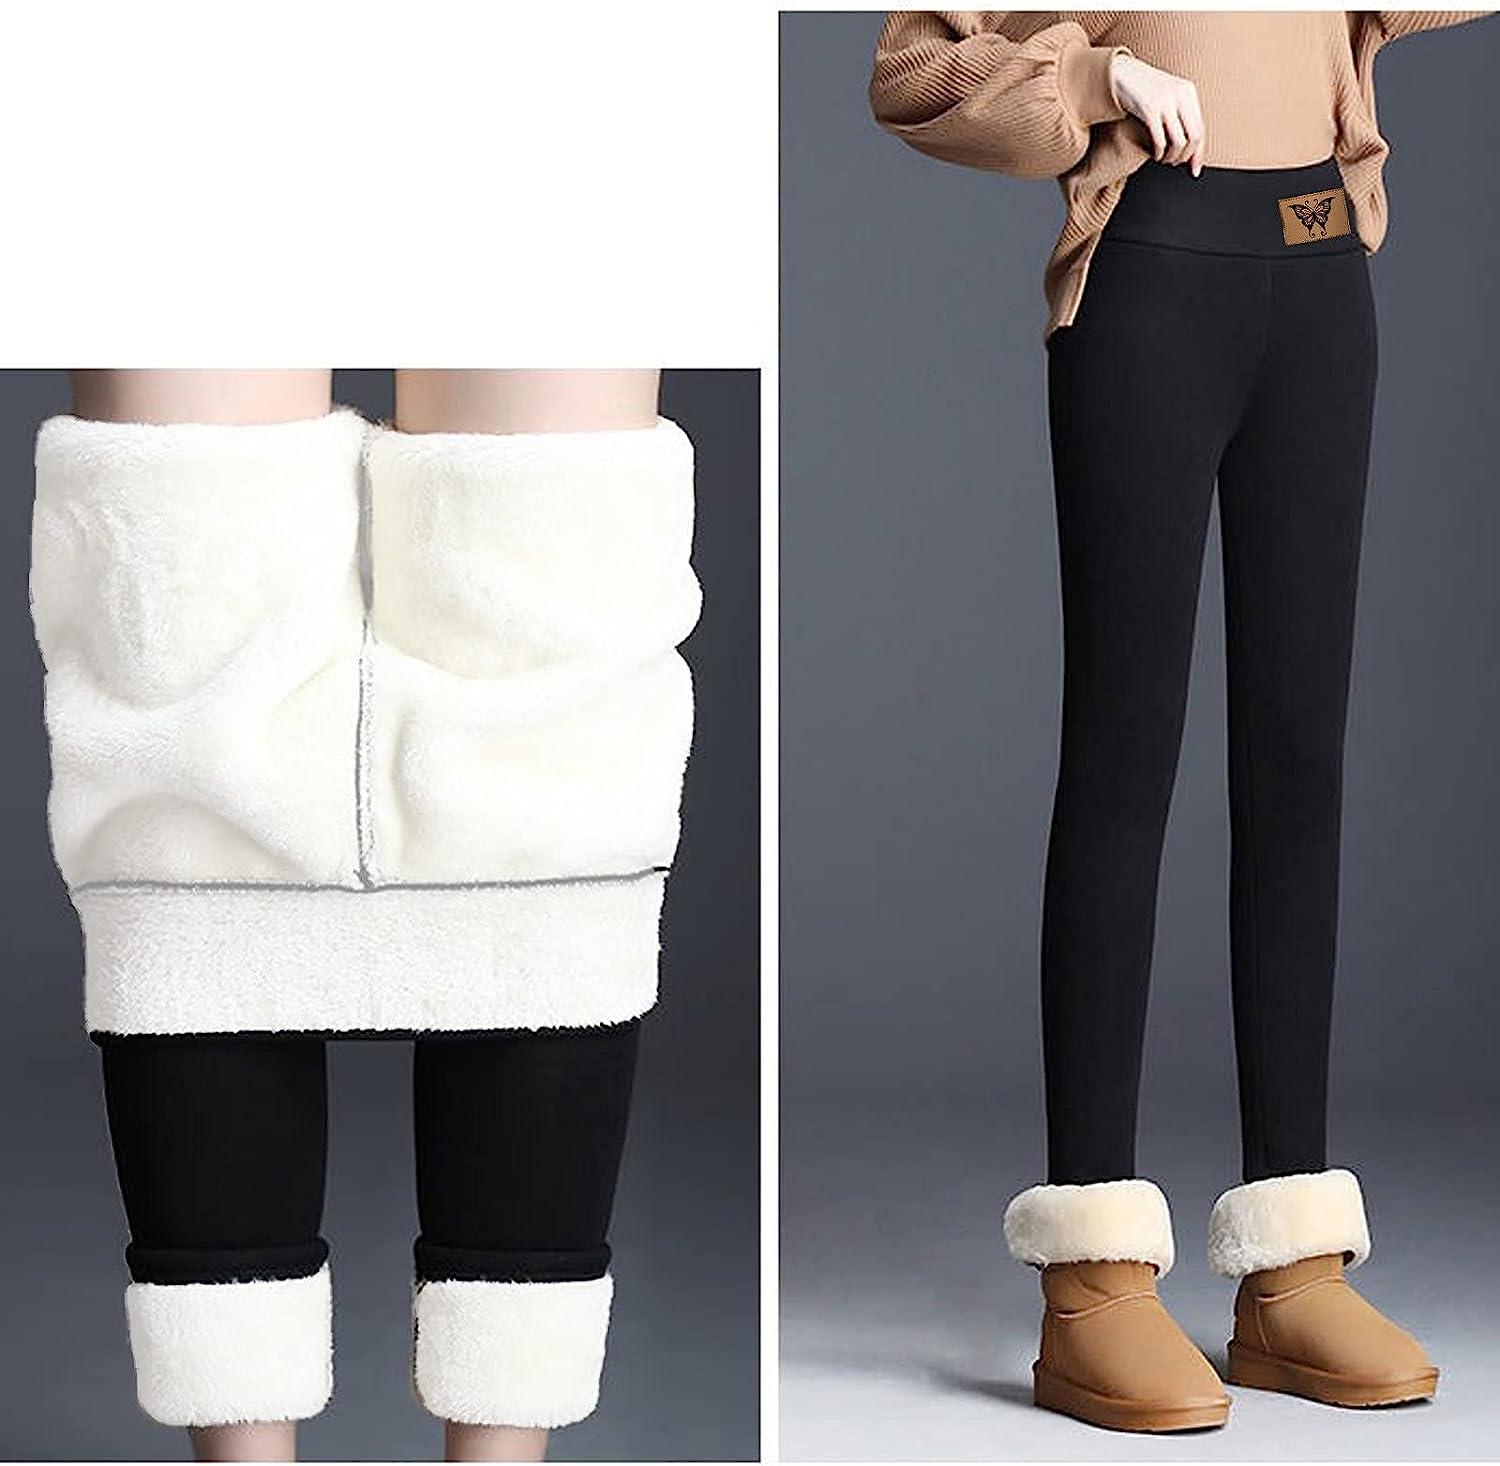 11 Best Merino Wool Leggings for Women to Stay Warm for Winter Travels-cokhiquangminh.vn